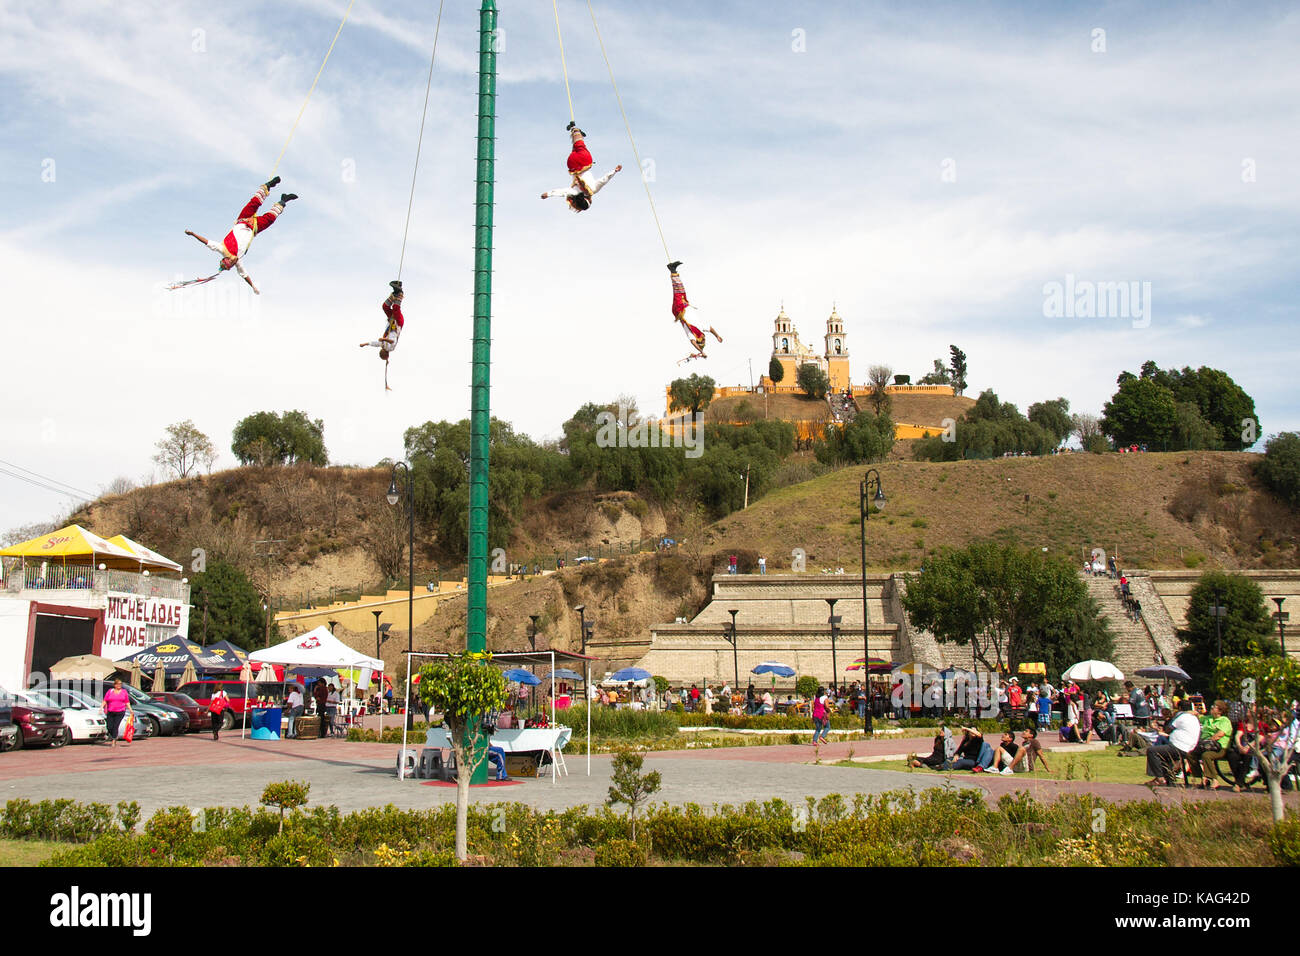 Cholula, Puebla, Mexico - 2016: Acrobats known as Los Voladores perform in font of the Great Pyramid of Cholula. Stock Photo